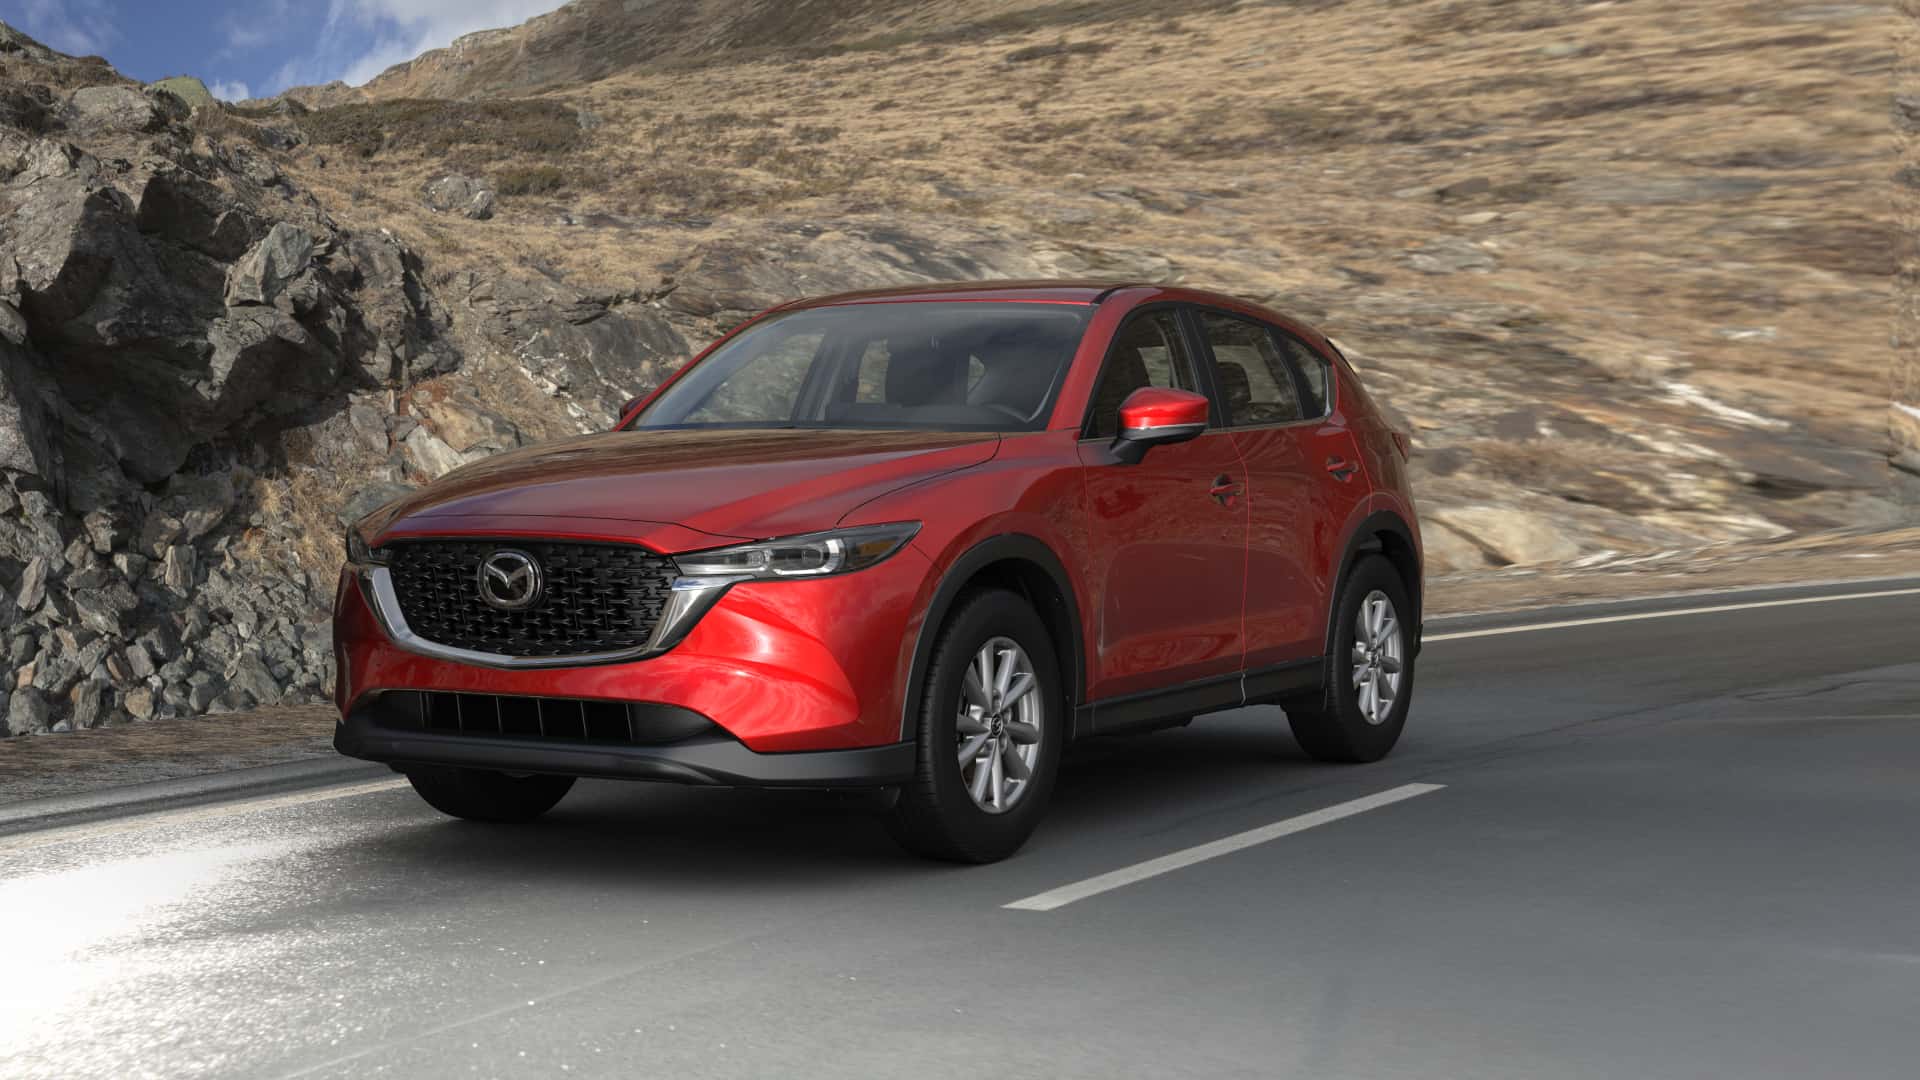 2023 Mazda CX-5 2.5 S Soul Red Crystal Metallic | Bommarito Mazda St. Peters in St. Peters MO